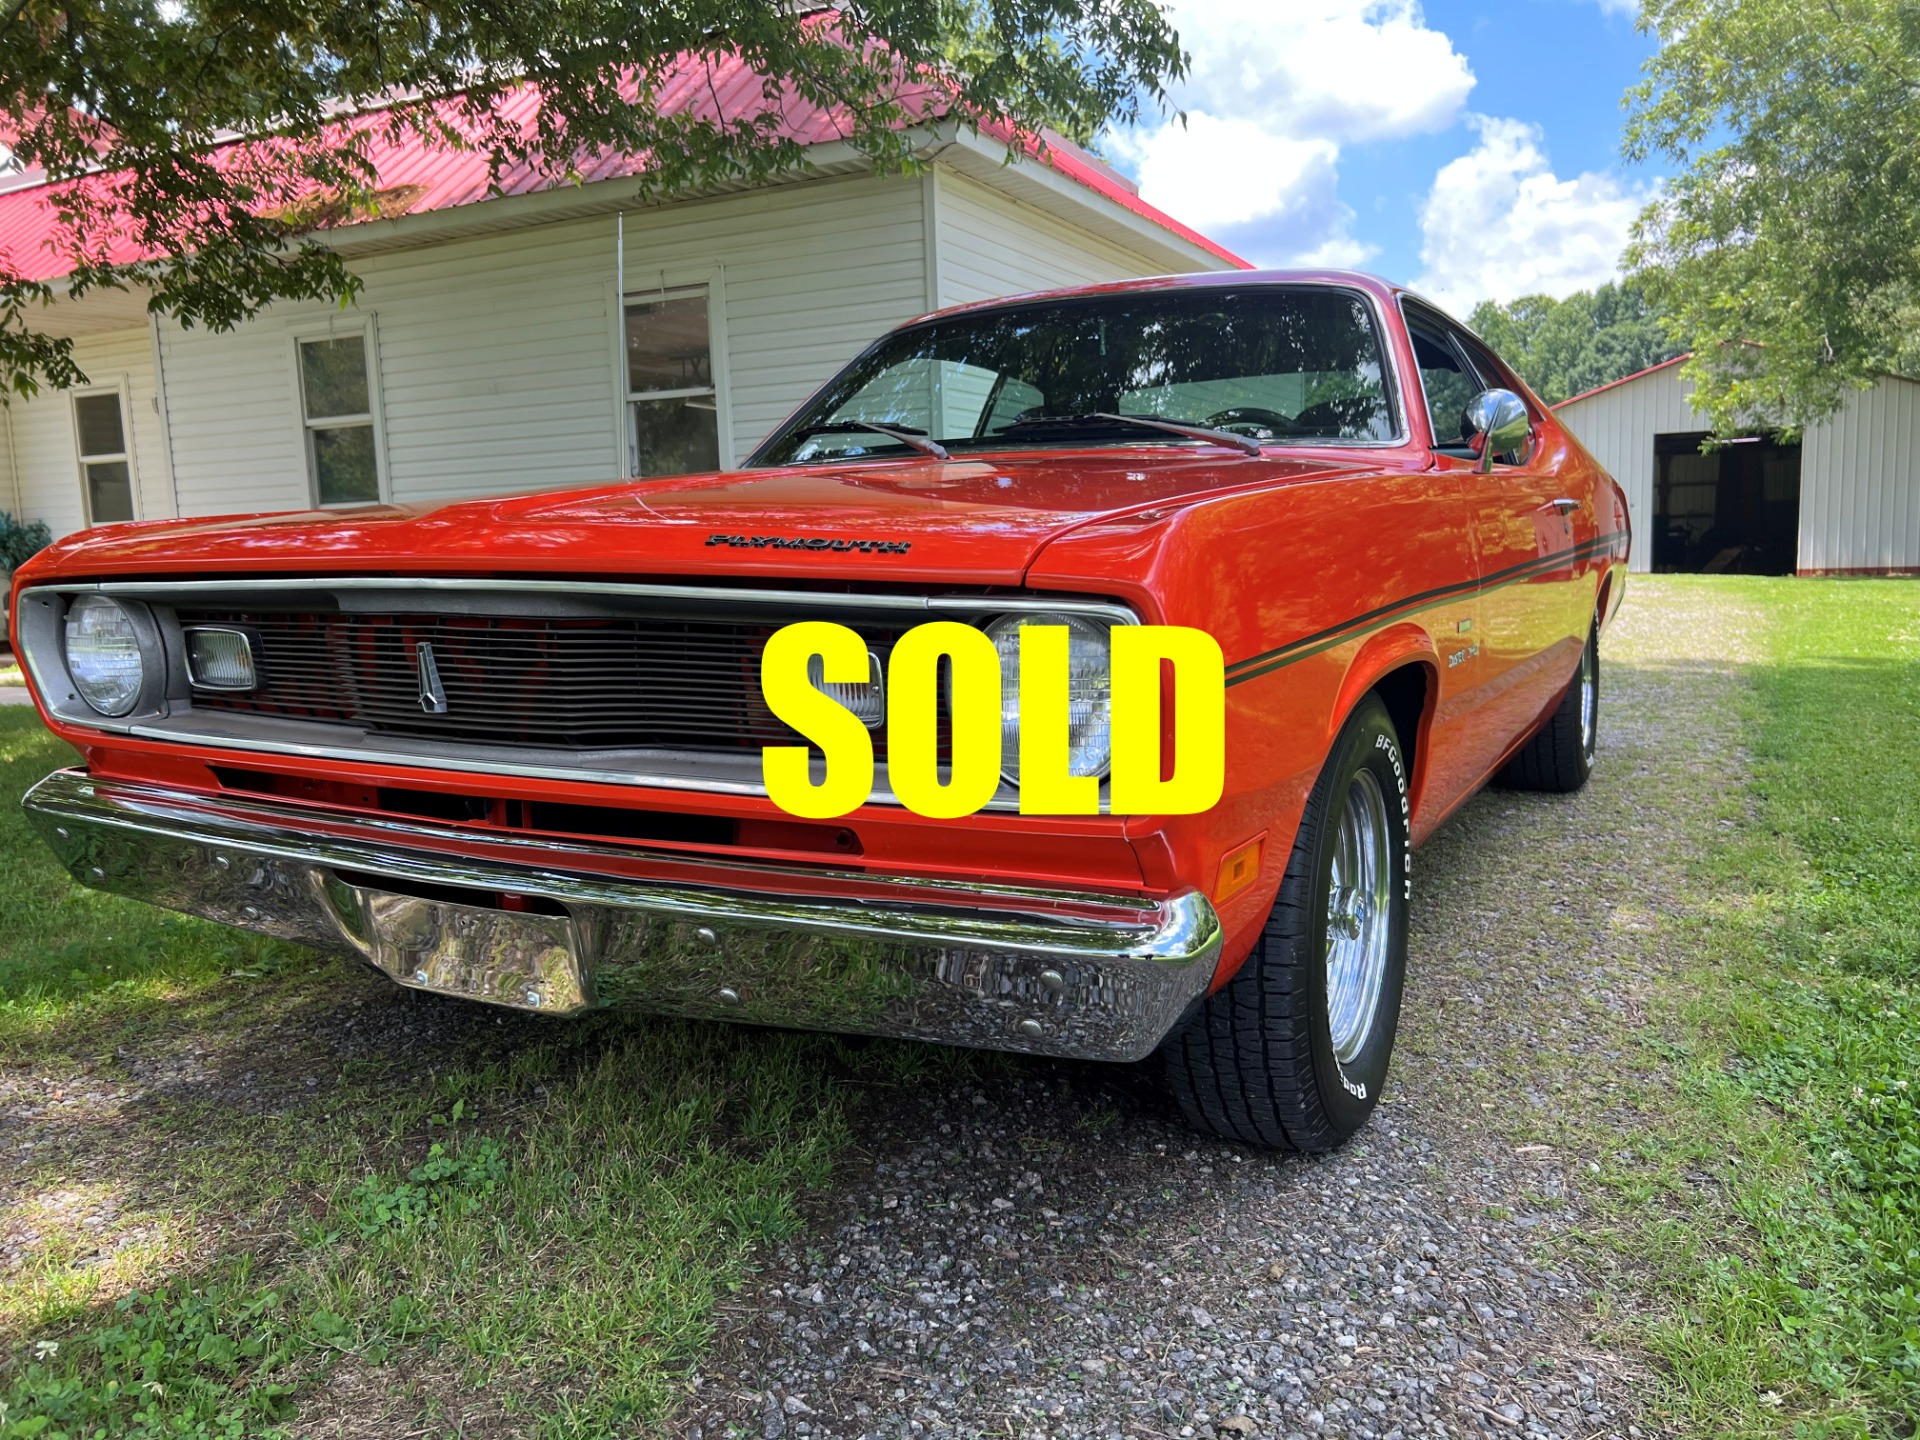 Used 1970 Plymouth Valiant Duster  249 , For Sale $42500, Call Us: (704) 996-3735